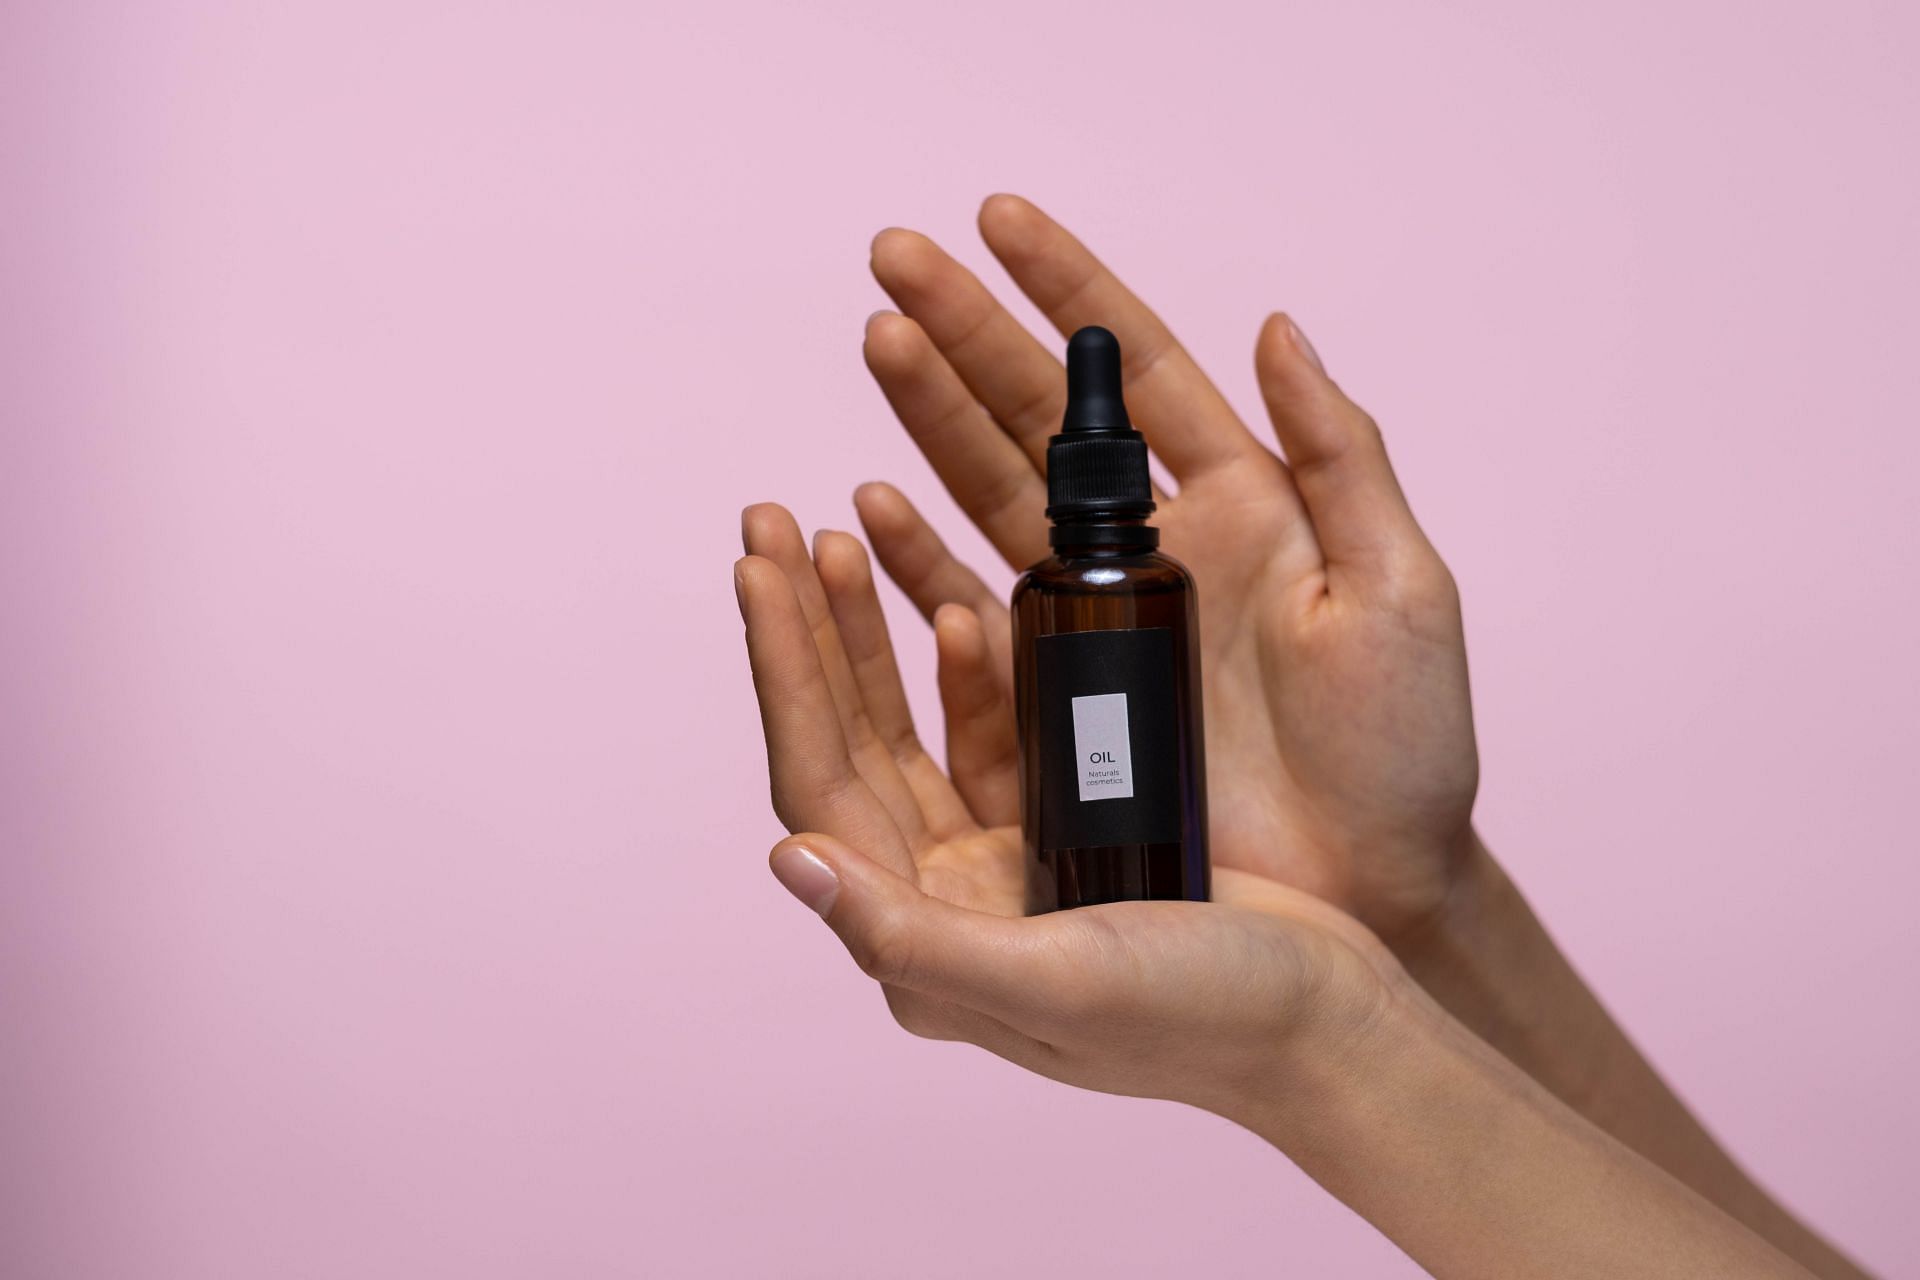 Applying face serums is one of the ways to get rid of these scars (Image via Pexels)